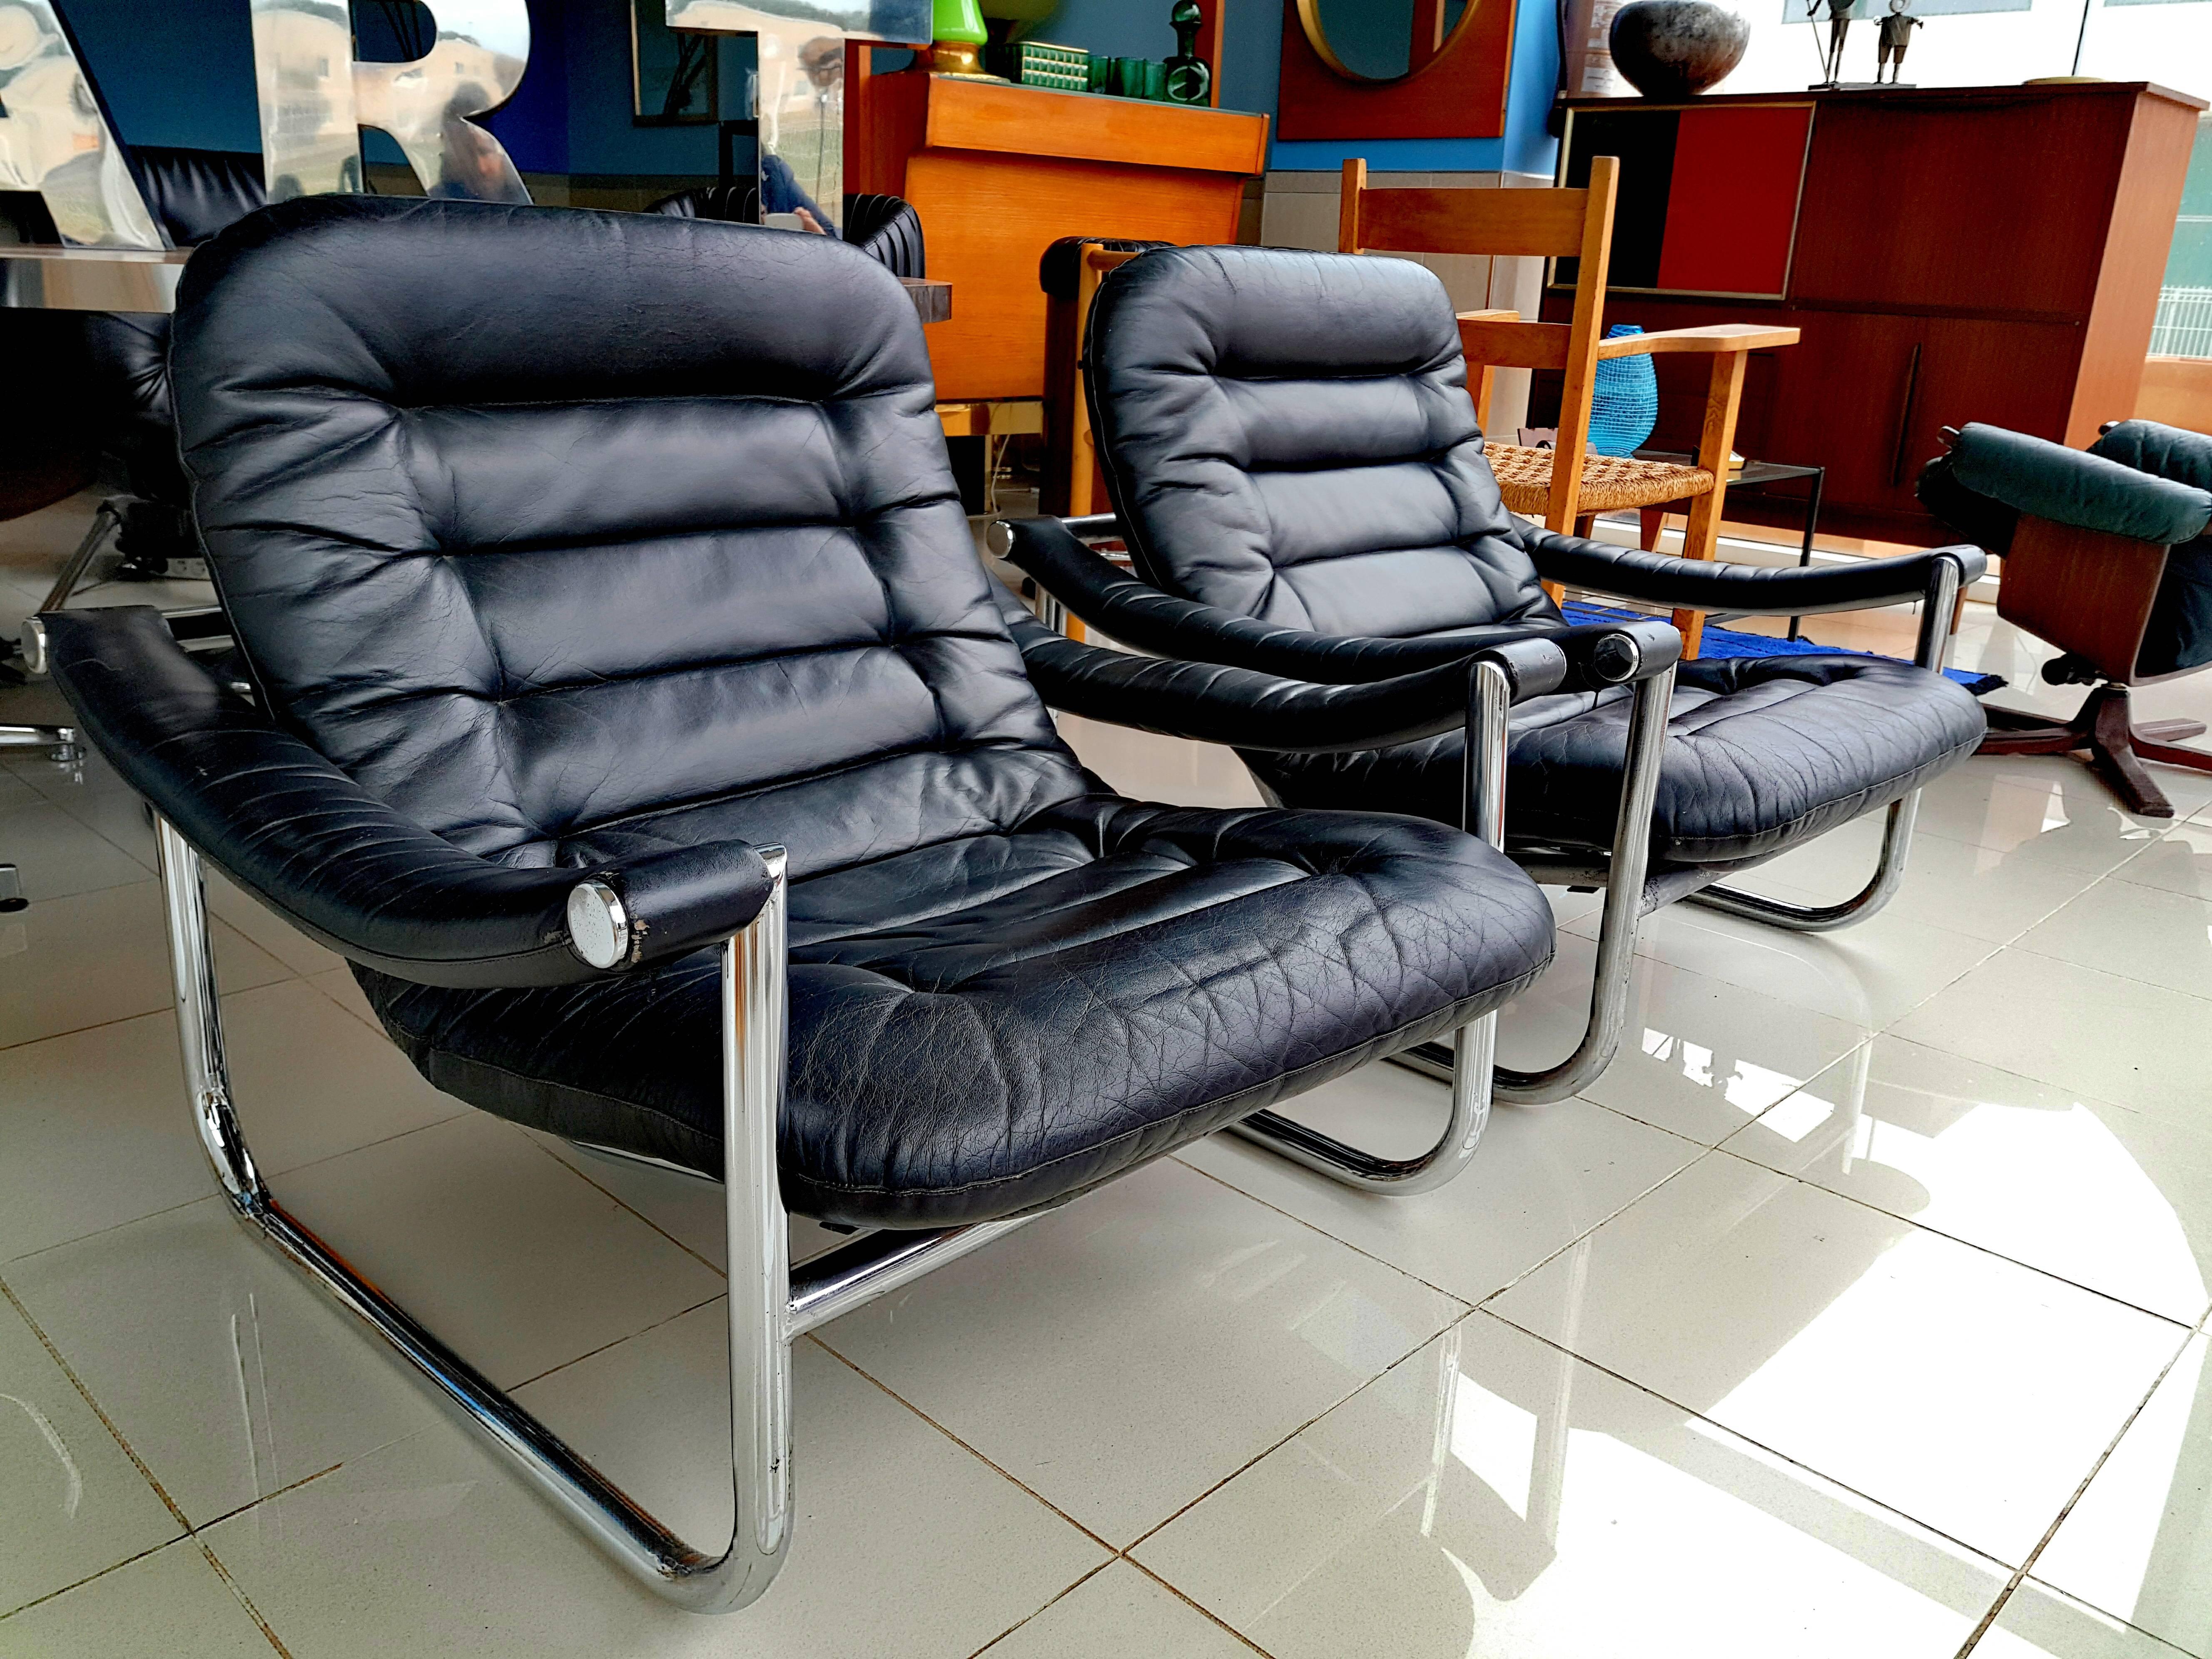 Beautiful and rare pair of Maga lounge chair circa 1970, in black leatherette and chrome, in perfect vintage condition. Very comfortable, adjustable in depth, sitting position lying.